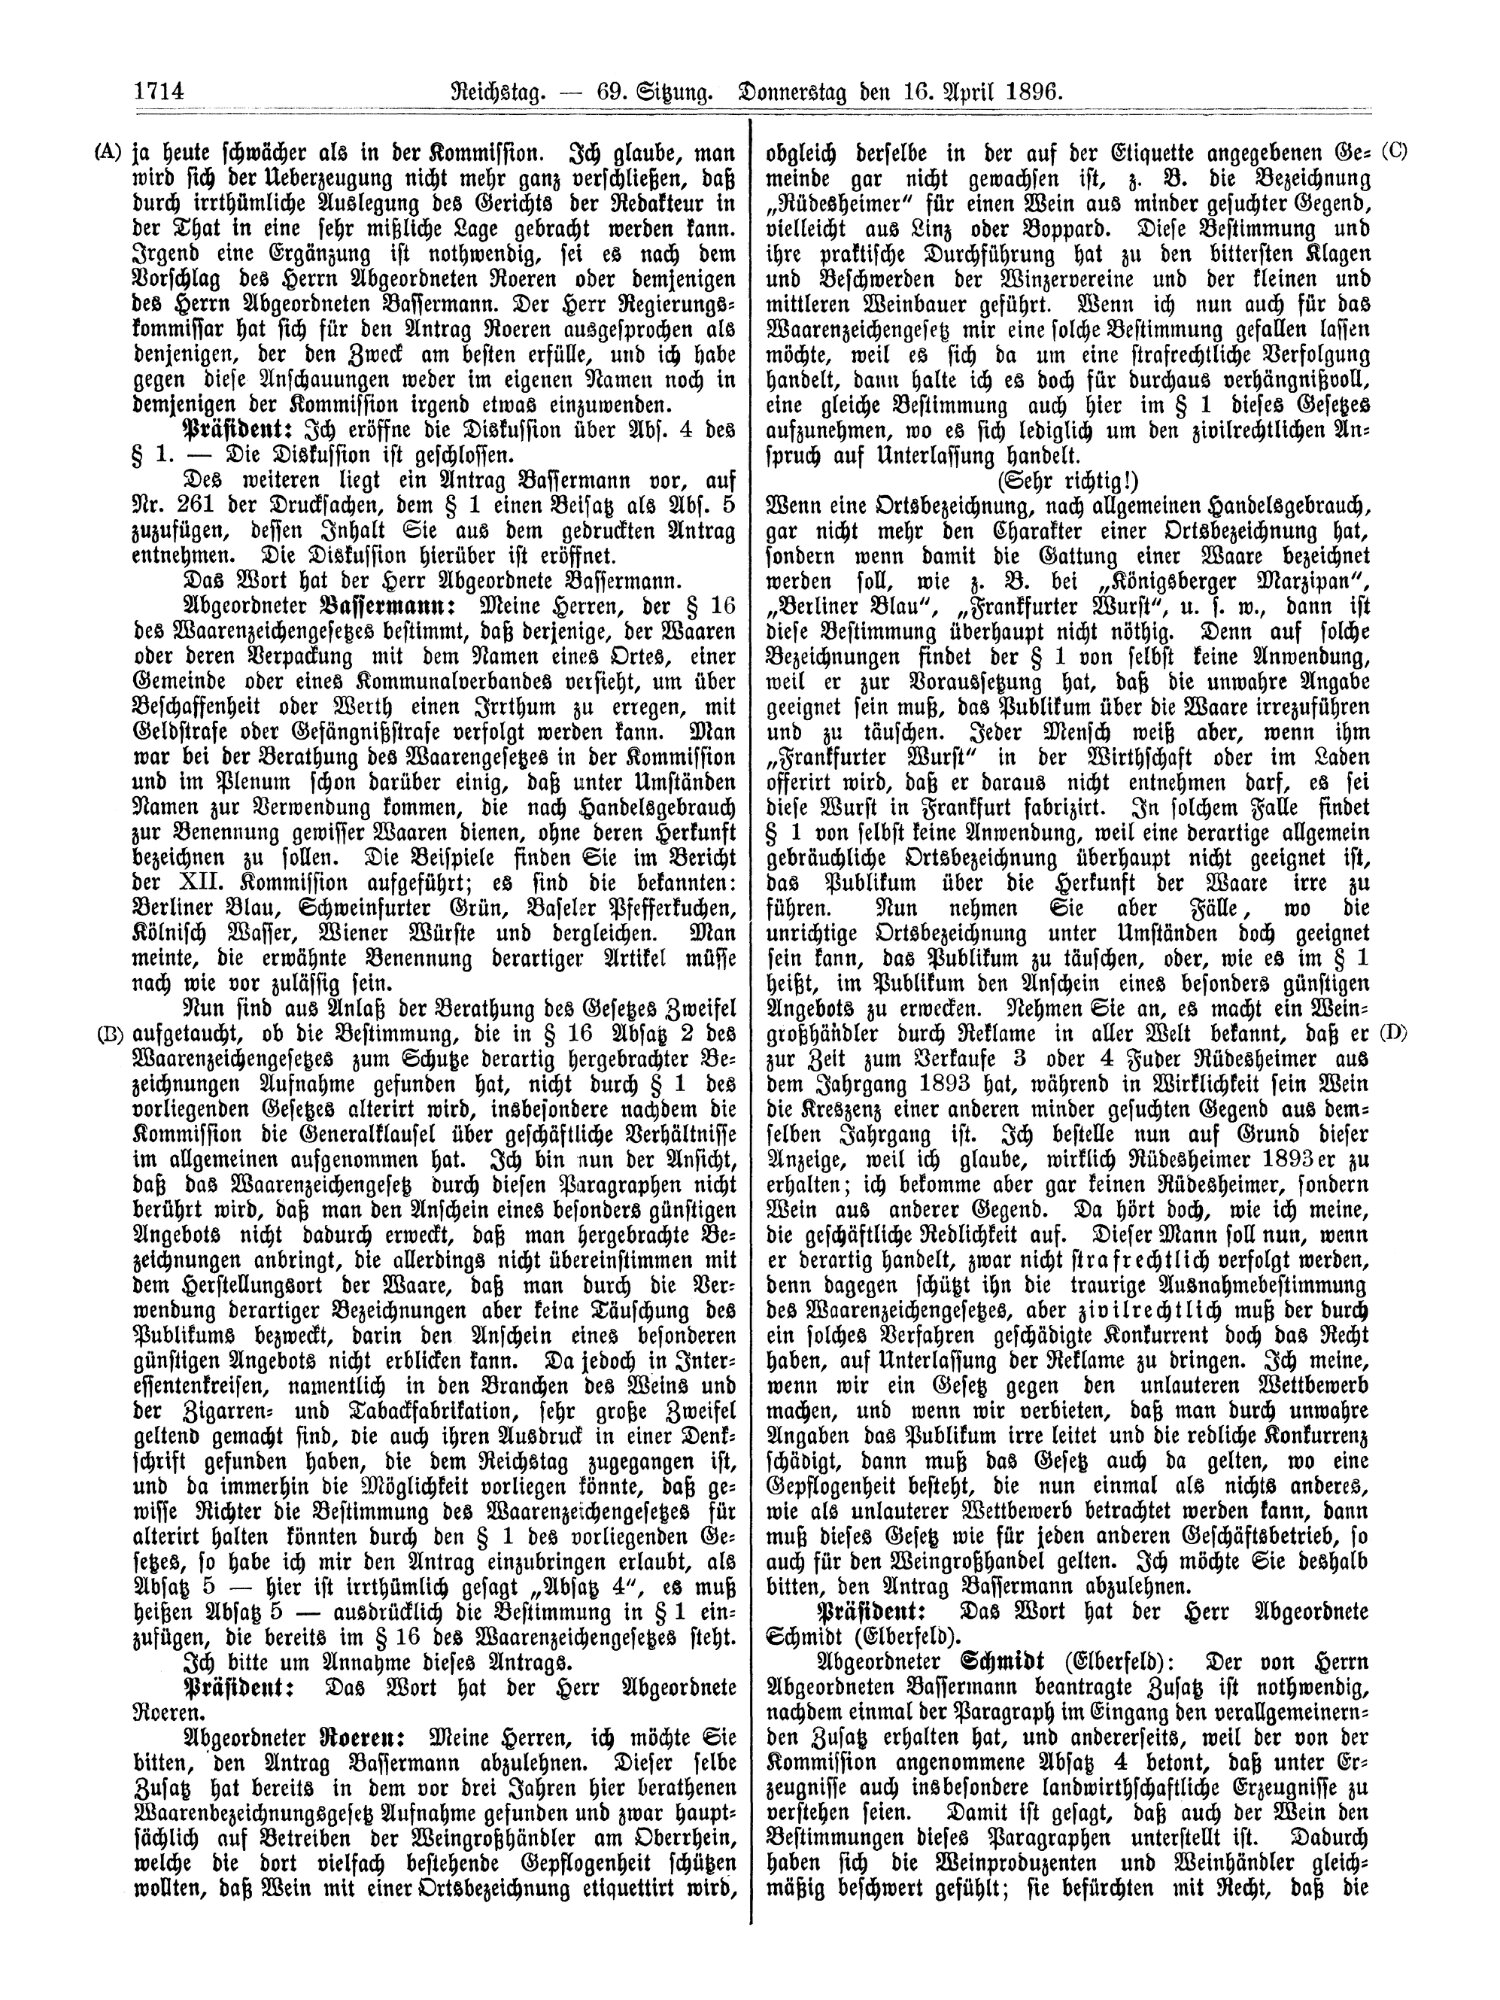 Scan of page 1714